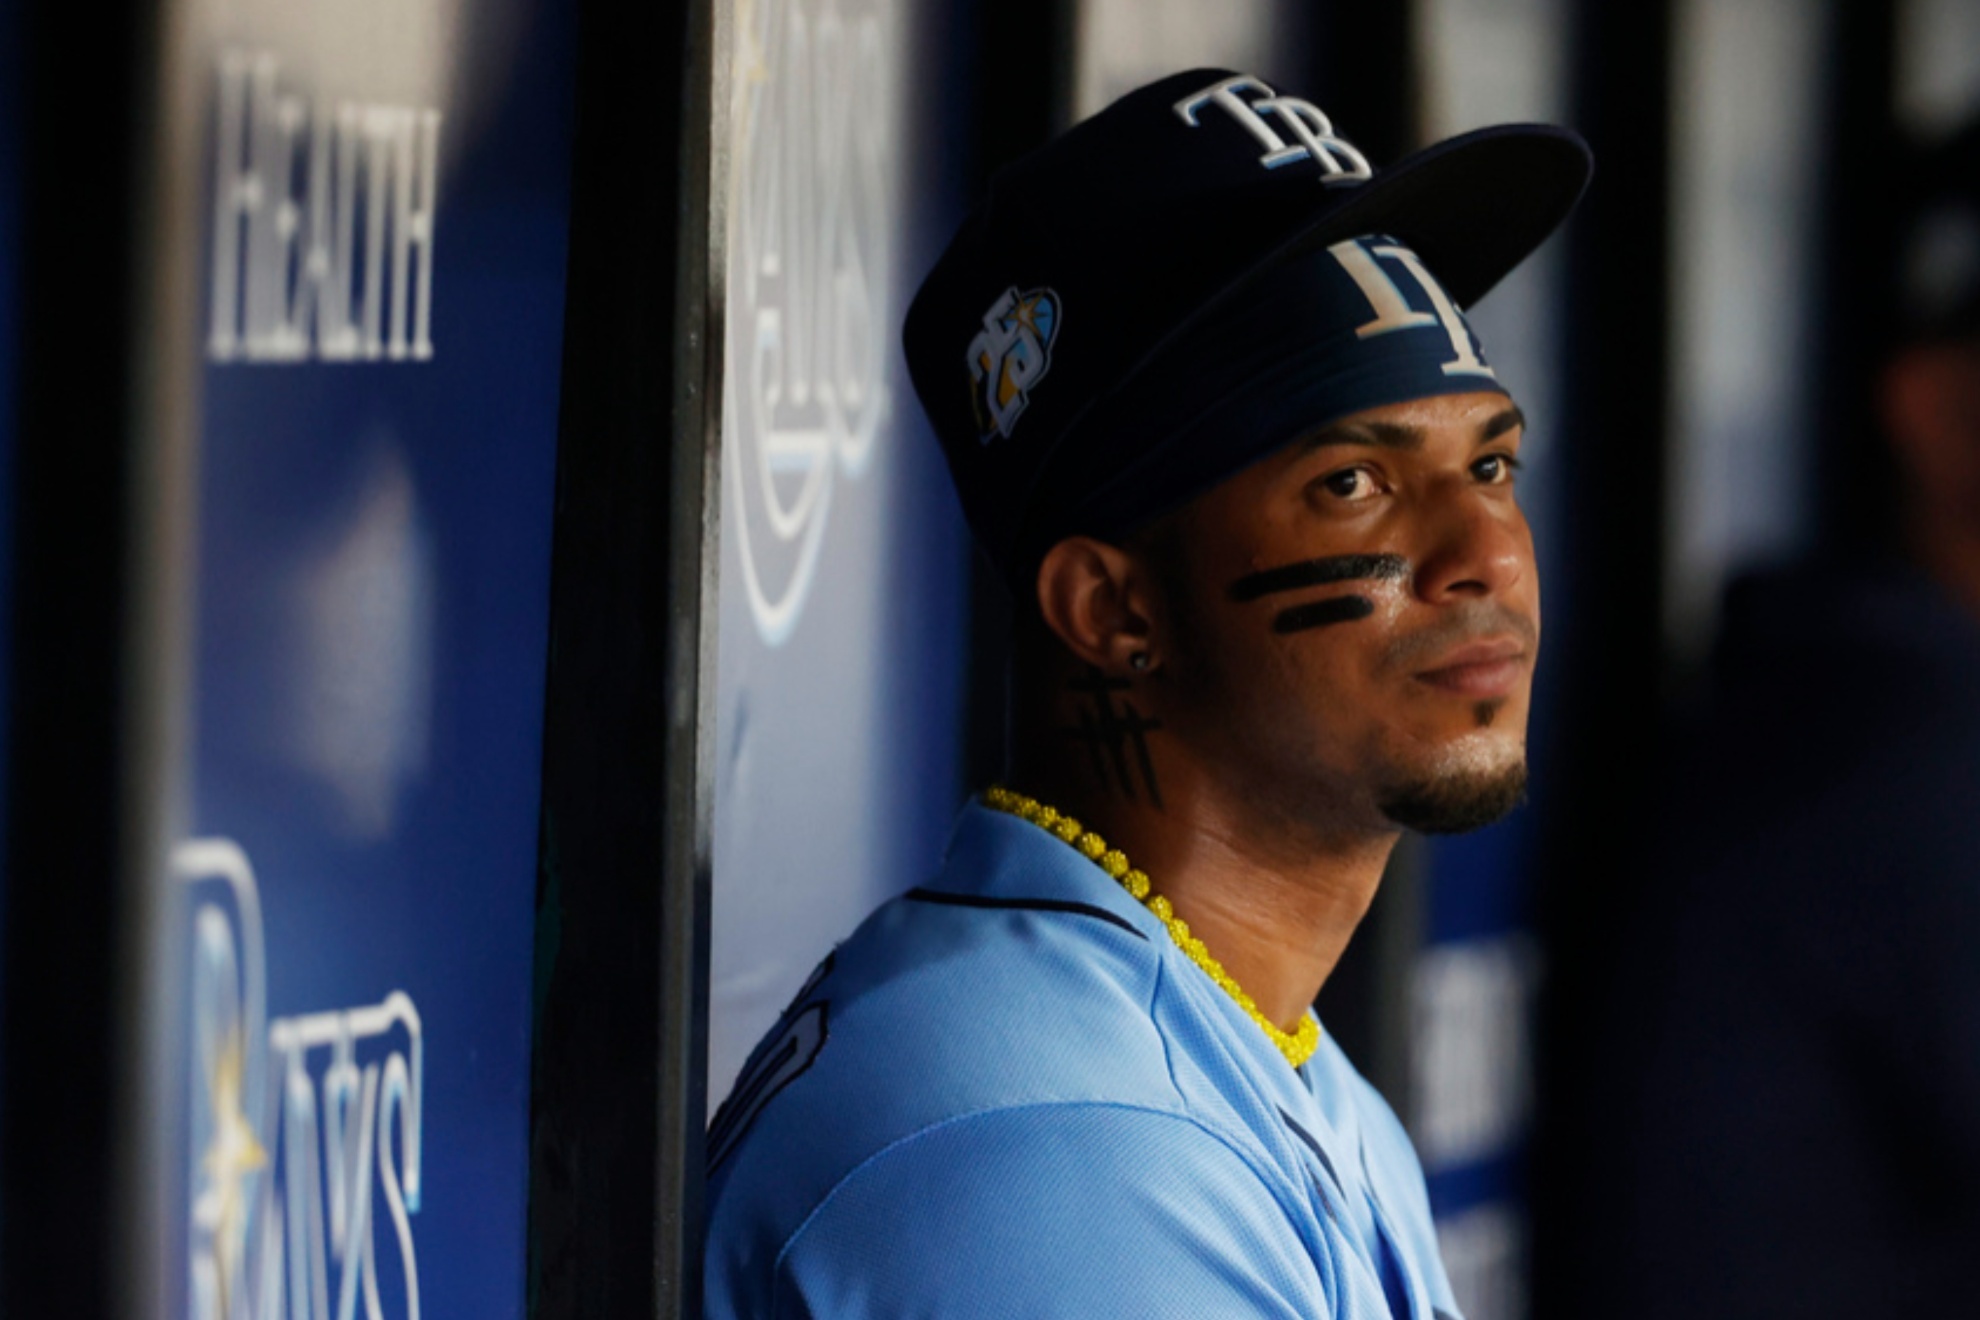 Tampa Bay Rays Wander Franco continues to be under arrest in the Dominican Republic